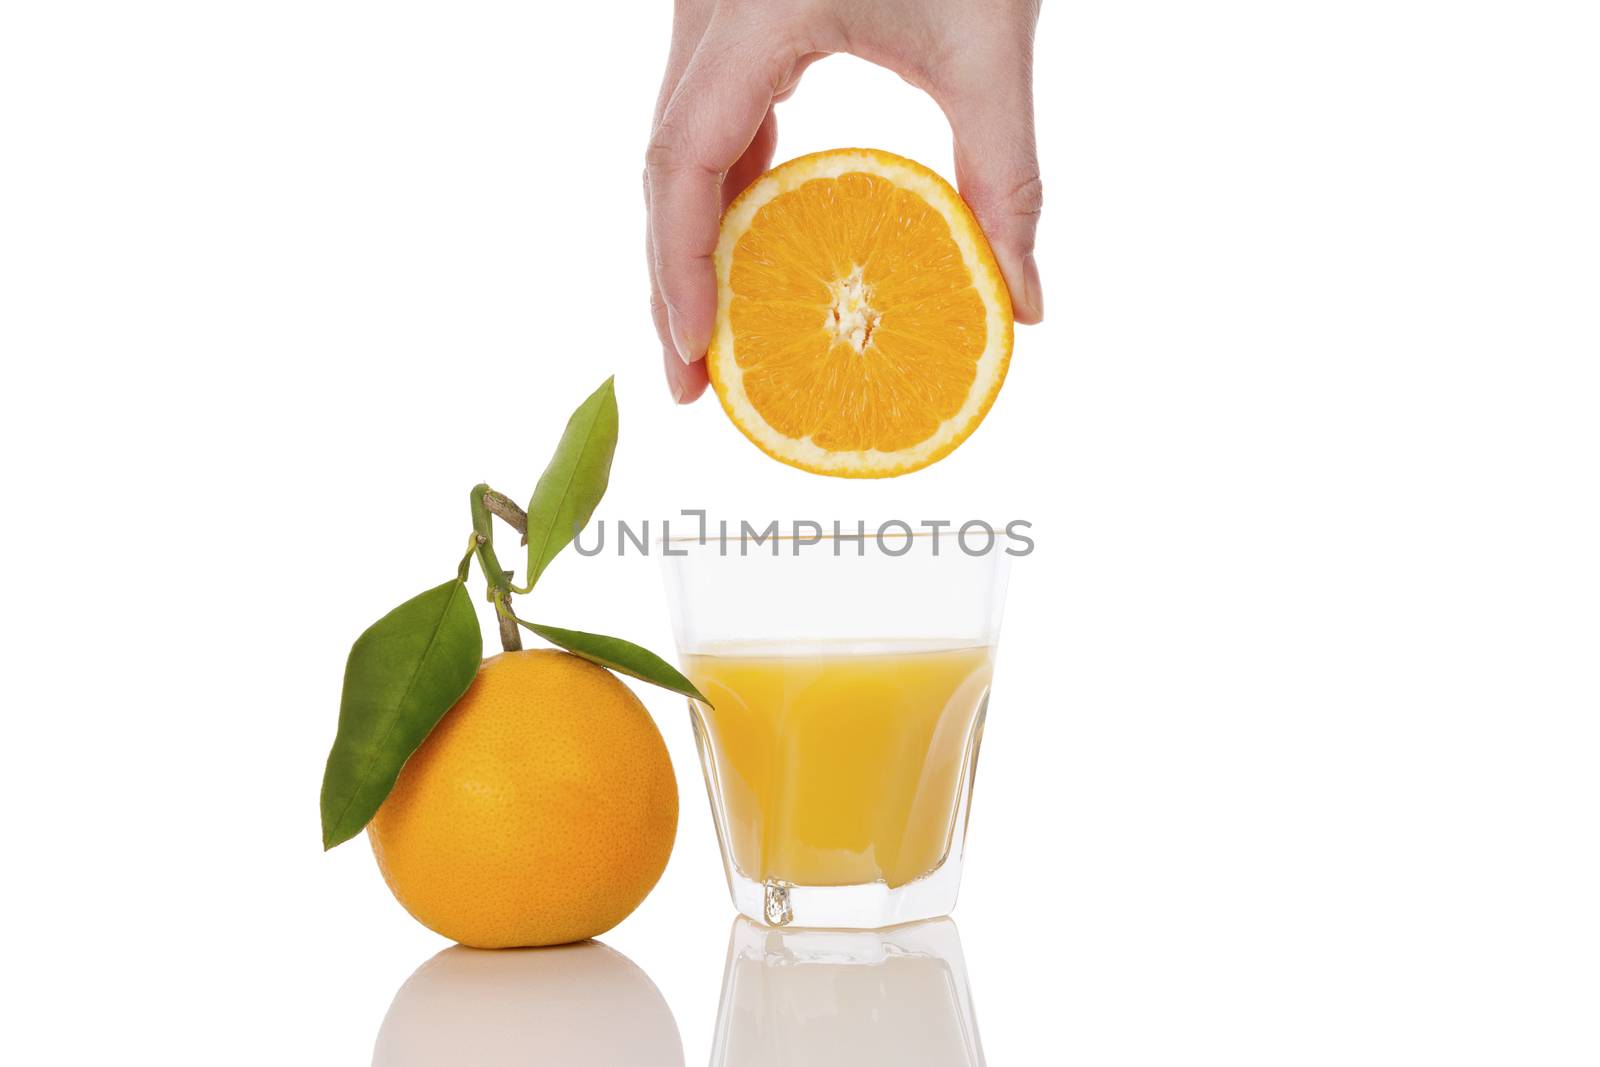 Freshly squeezed orange juice. Female hand squeezing orange into a glass isolated on white background. Healthy juice drink.  